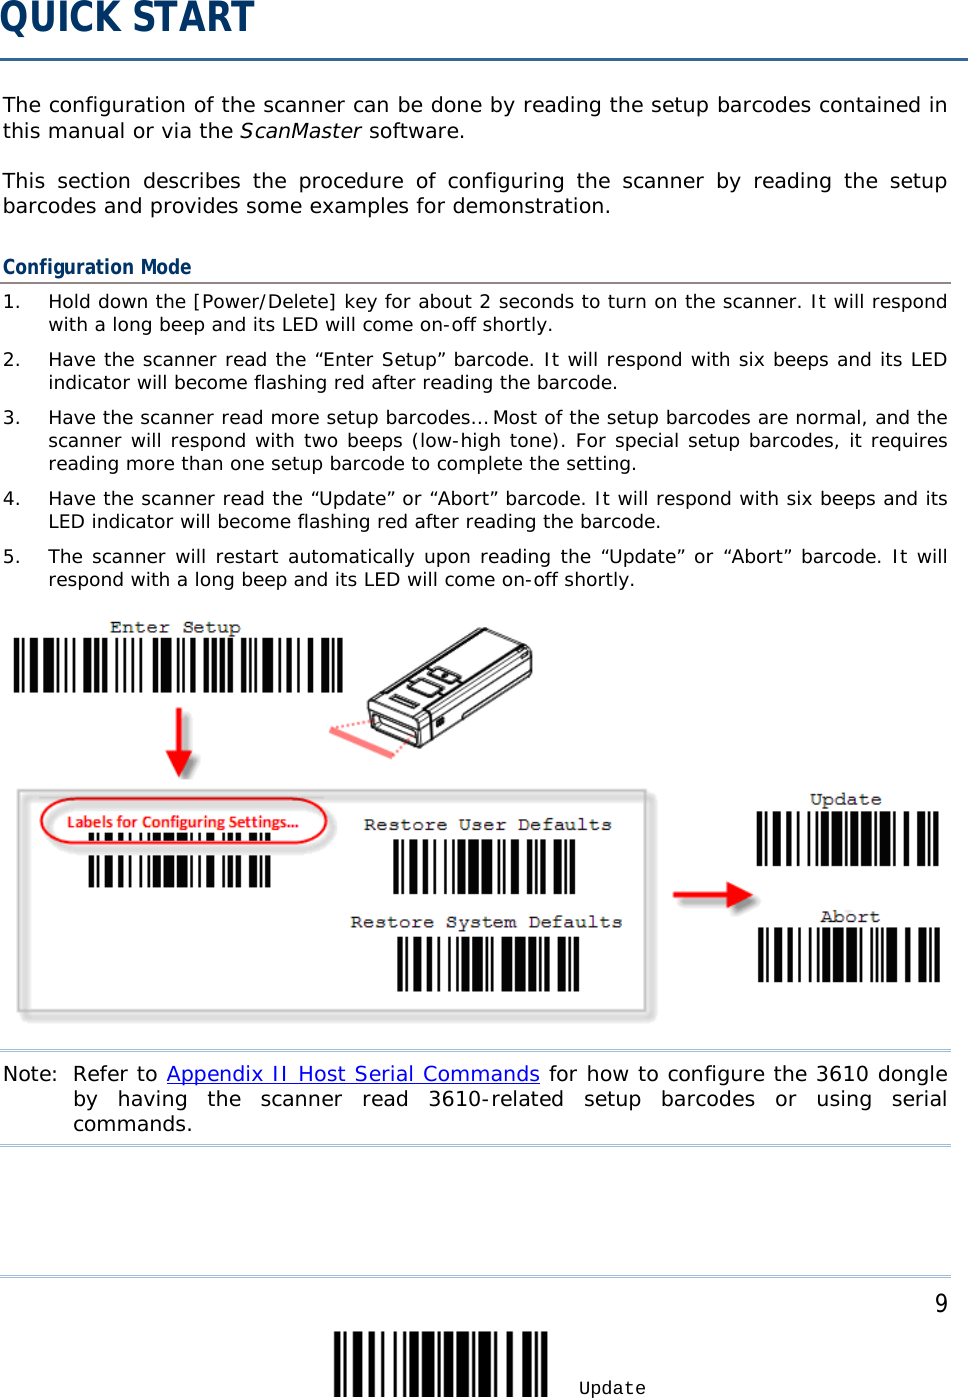     9 Update  The configuration of the scanner can be done by reading the setup barcodes contained in this manual or via the ScanMaster software.  This  section describes the procedure of configuring the scanner by reading the setup barcodes and provides some examples for demonstration. Configuration Mode 1. Hold down the [Power/Delete] key for about 2 seconds to turn on the scanner. It will respond with a long beep and its LED will come on-off shortly. 2. Have the scanner read the “Enter Setup” barcode. It will respond with six beeps and its LED indicator will become flashing red after reading the barcode. 3. Have the scanner read more setup barcodes… Most of the setup barcodes are normal, and the scanner will respond with two beeps (low-high tone). For special setup barcodes, it requires reading more than one setup barcode to complete the setting. 4. Have the scanner read the “Update” or “Abort” barcode. It will respond with six beeps and its LED indicator will become flashing red after reading the barcode. 5. The scanner will restart automatically upon reading the “Update” or “Abort” barcode. It will respond with a long beep and its LED will come on-off shortly.  Note: Refer to Appendix II Host Serial Commands for how to configure the 3610 dongle by having the scanner read 3610-related setup barcodes or using serial commands.  QUICK START 